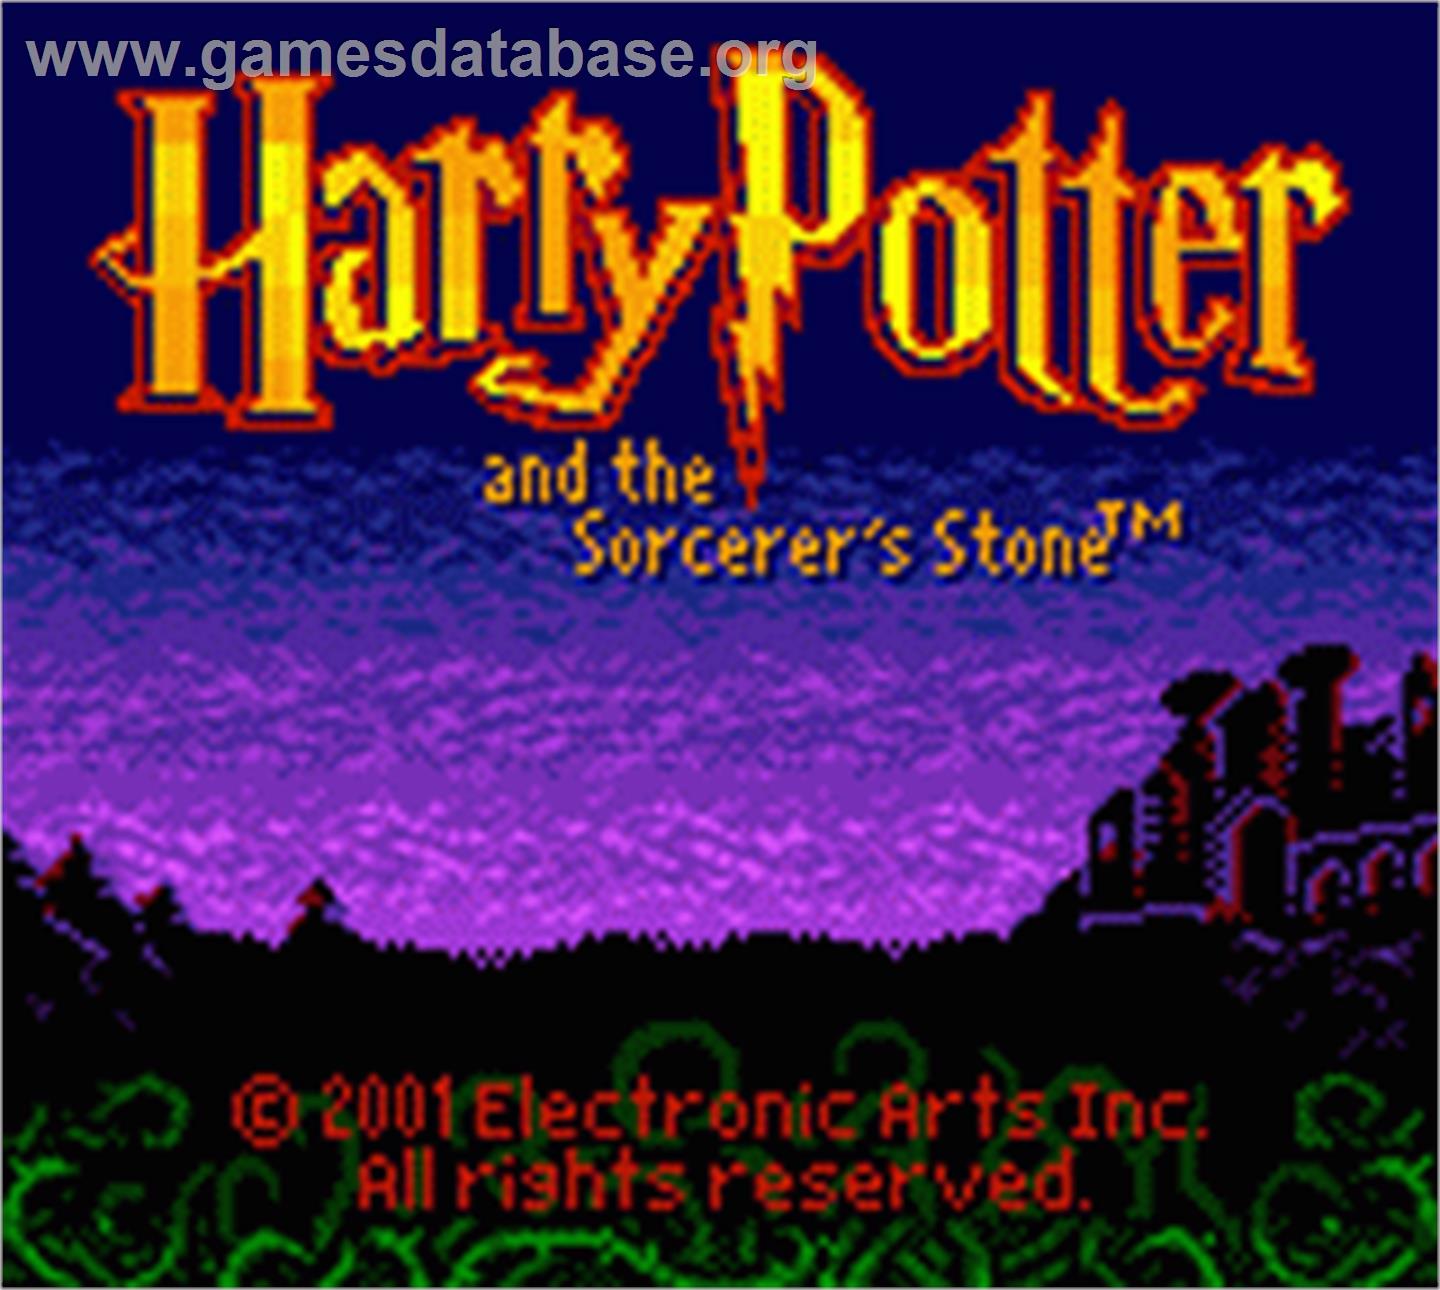 Harry Potter and the Sorcerer's Stone - Nintendo Game Boy Color - Artwork - Title Screen